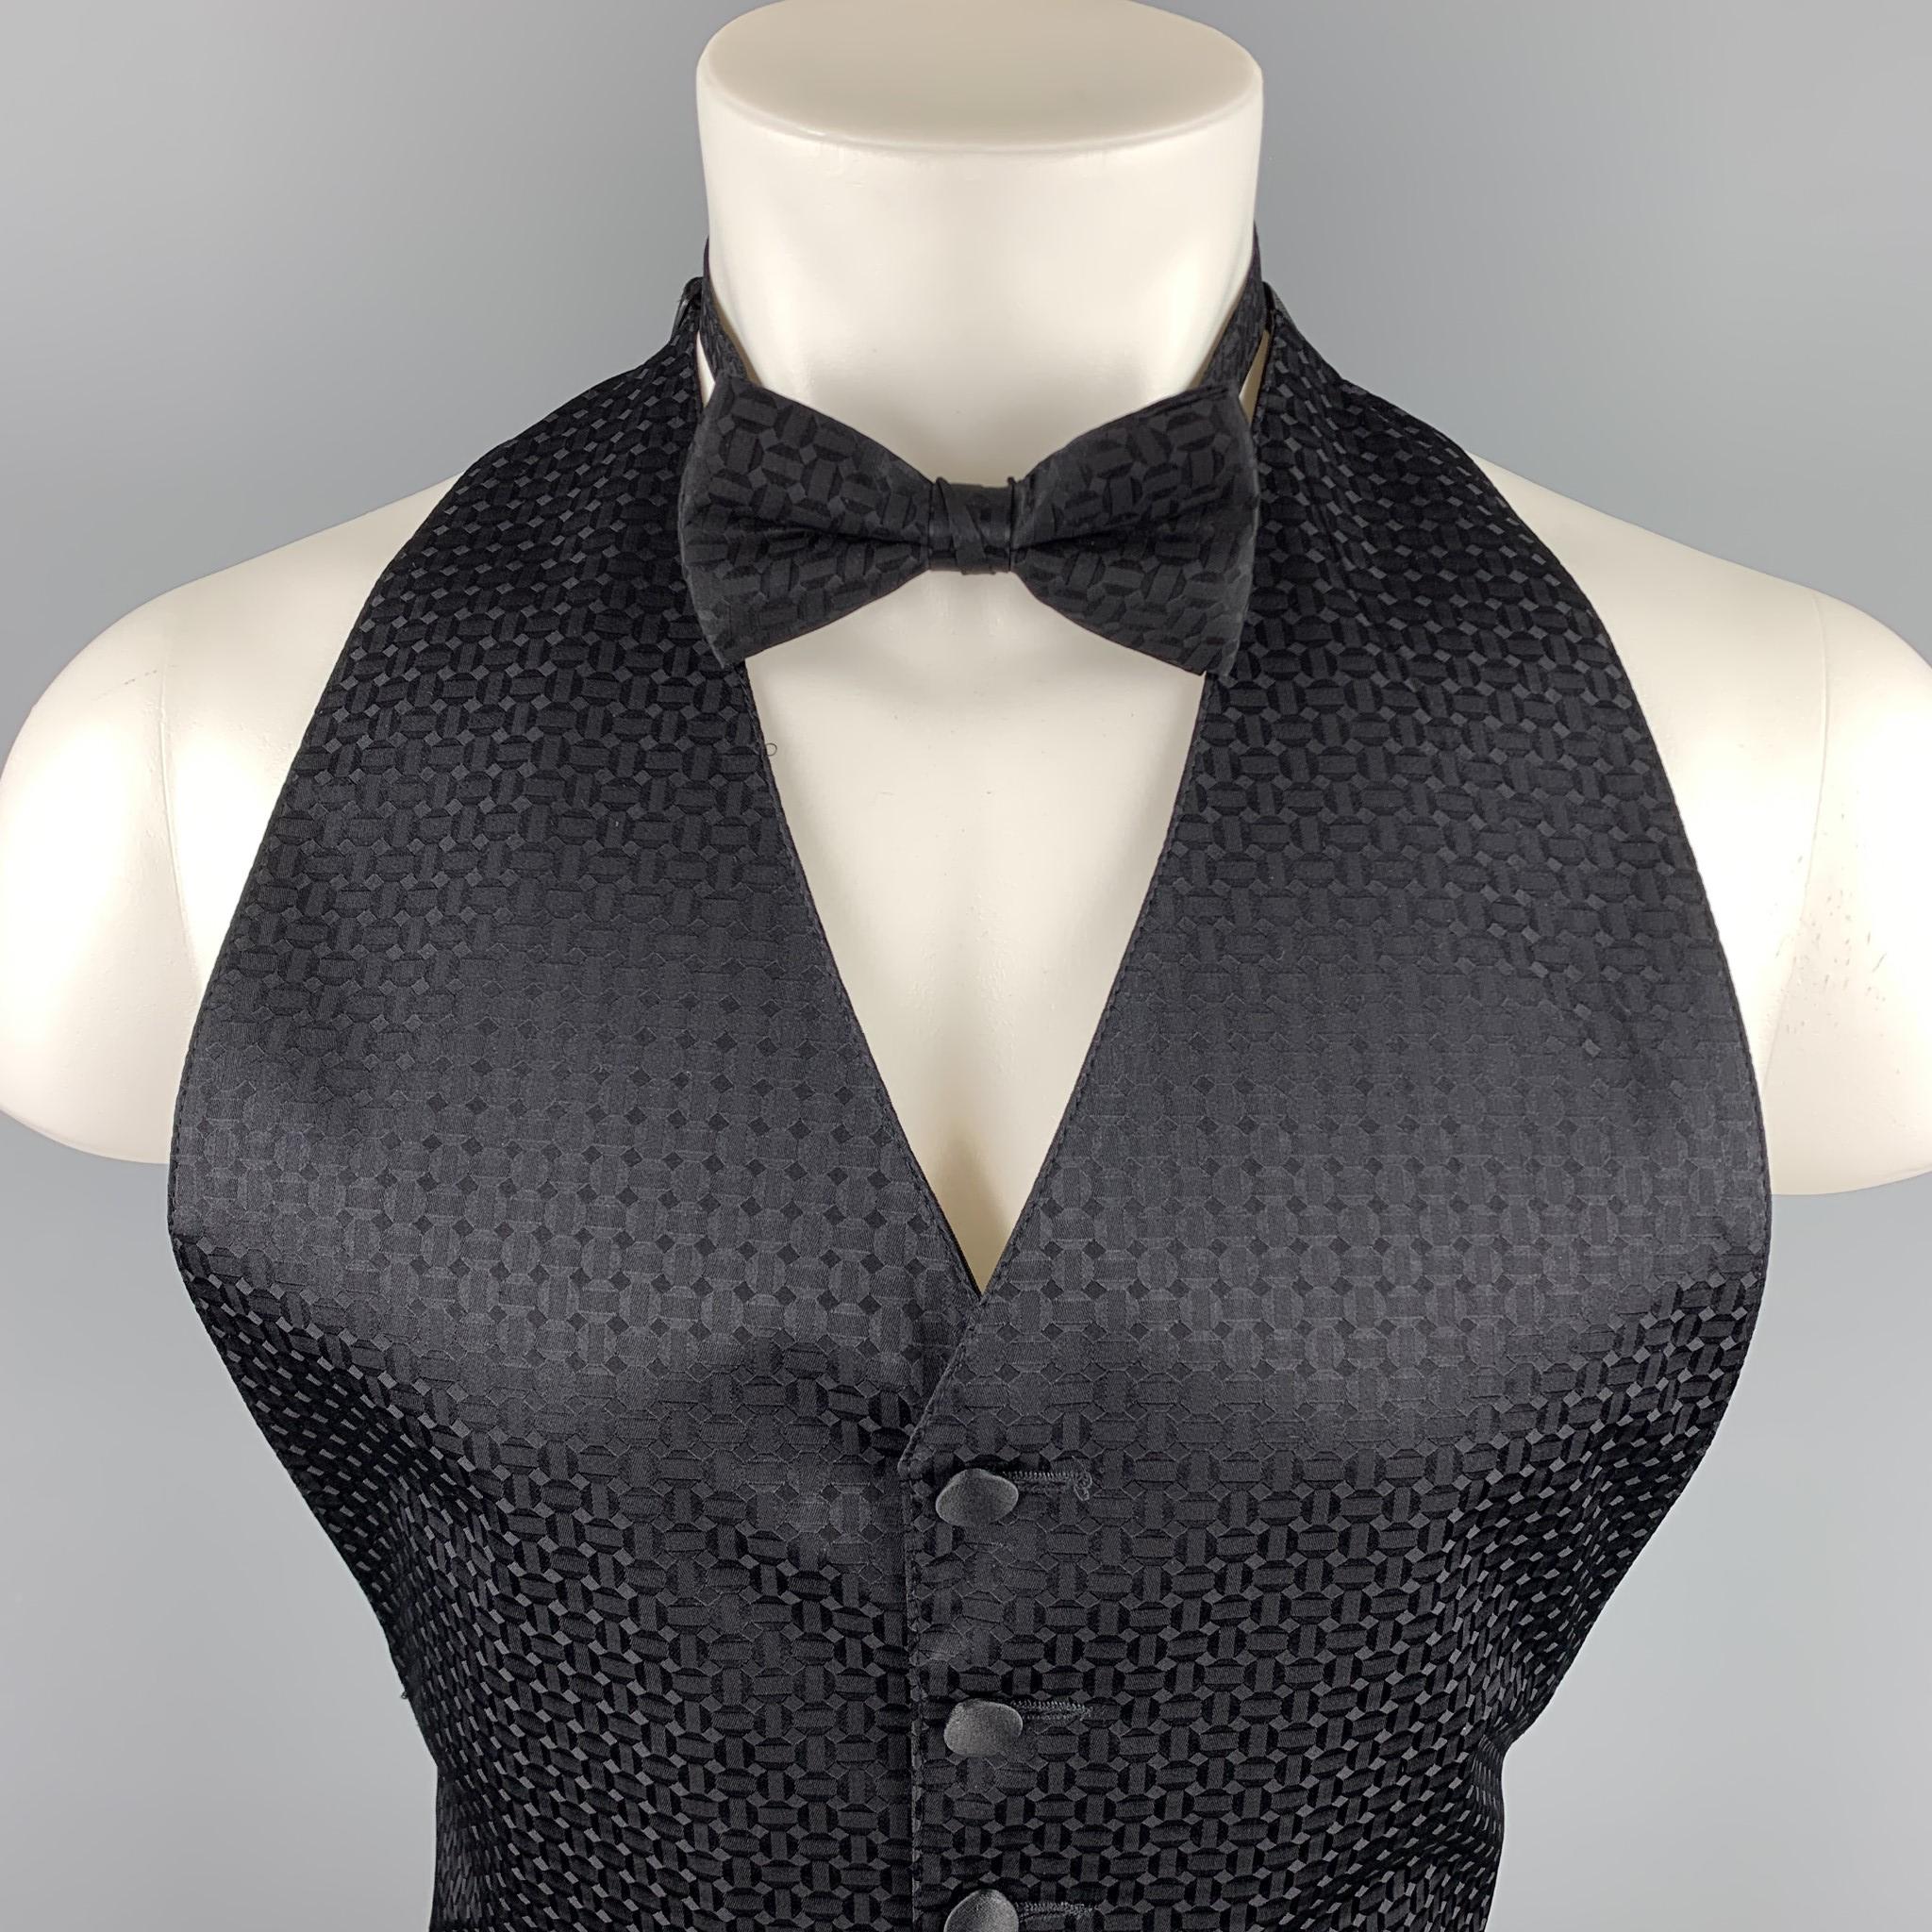 BILL BLASS vest set comes in a black on black geometric print featuring a match bow tie set, slit pockets, and a buttoned closure. 

Good Pre-Owned Condition.
Marked: No size marked 

Measurements:

Shoulder: 10.5 in. 
Length: 25 in. 

SKU: